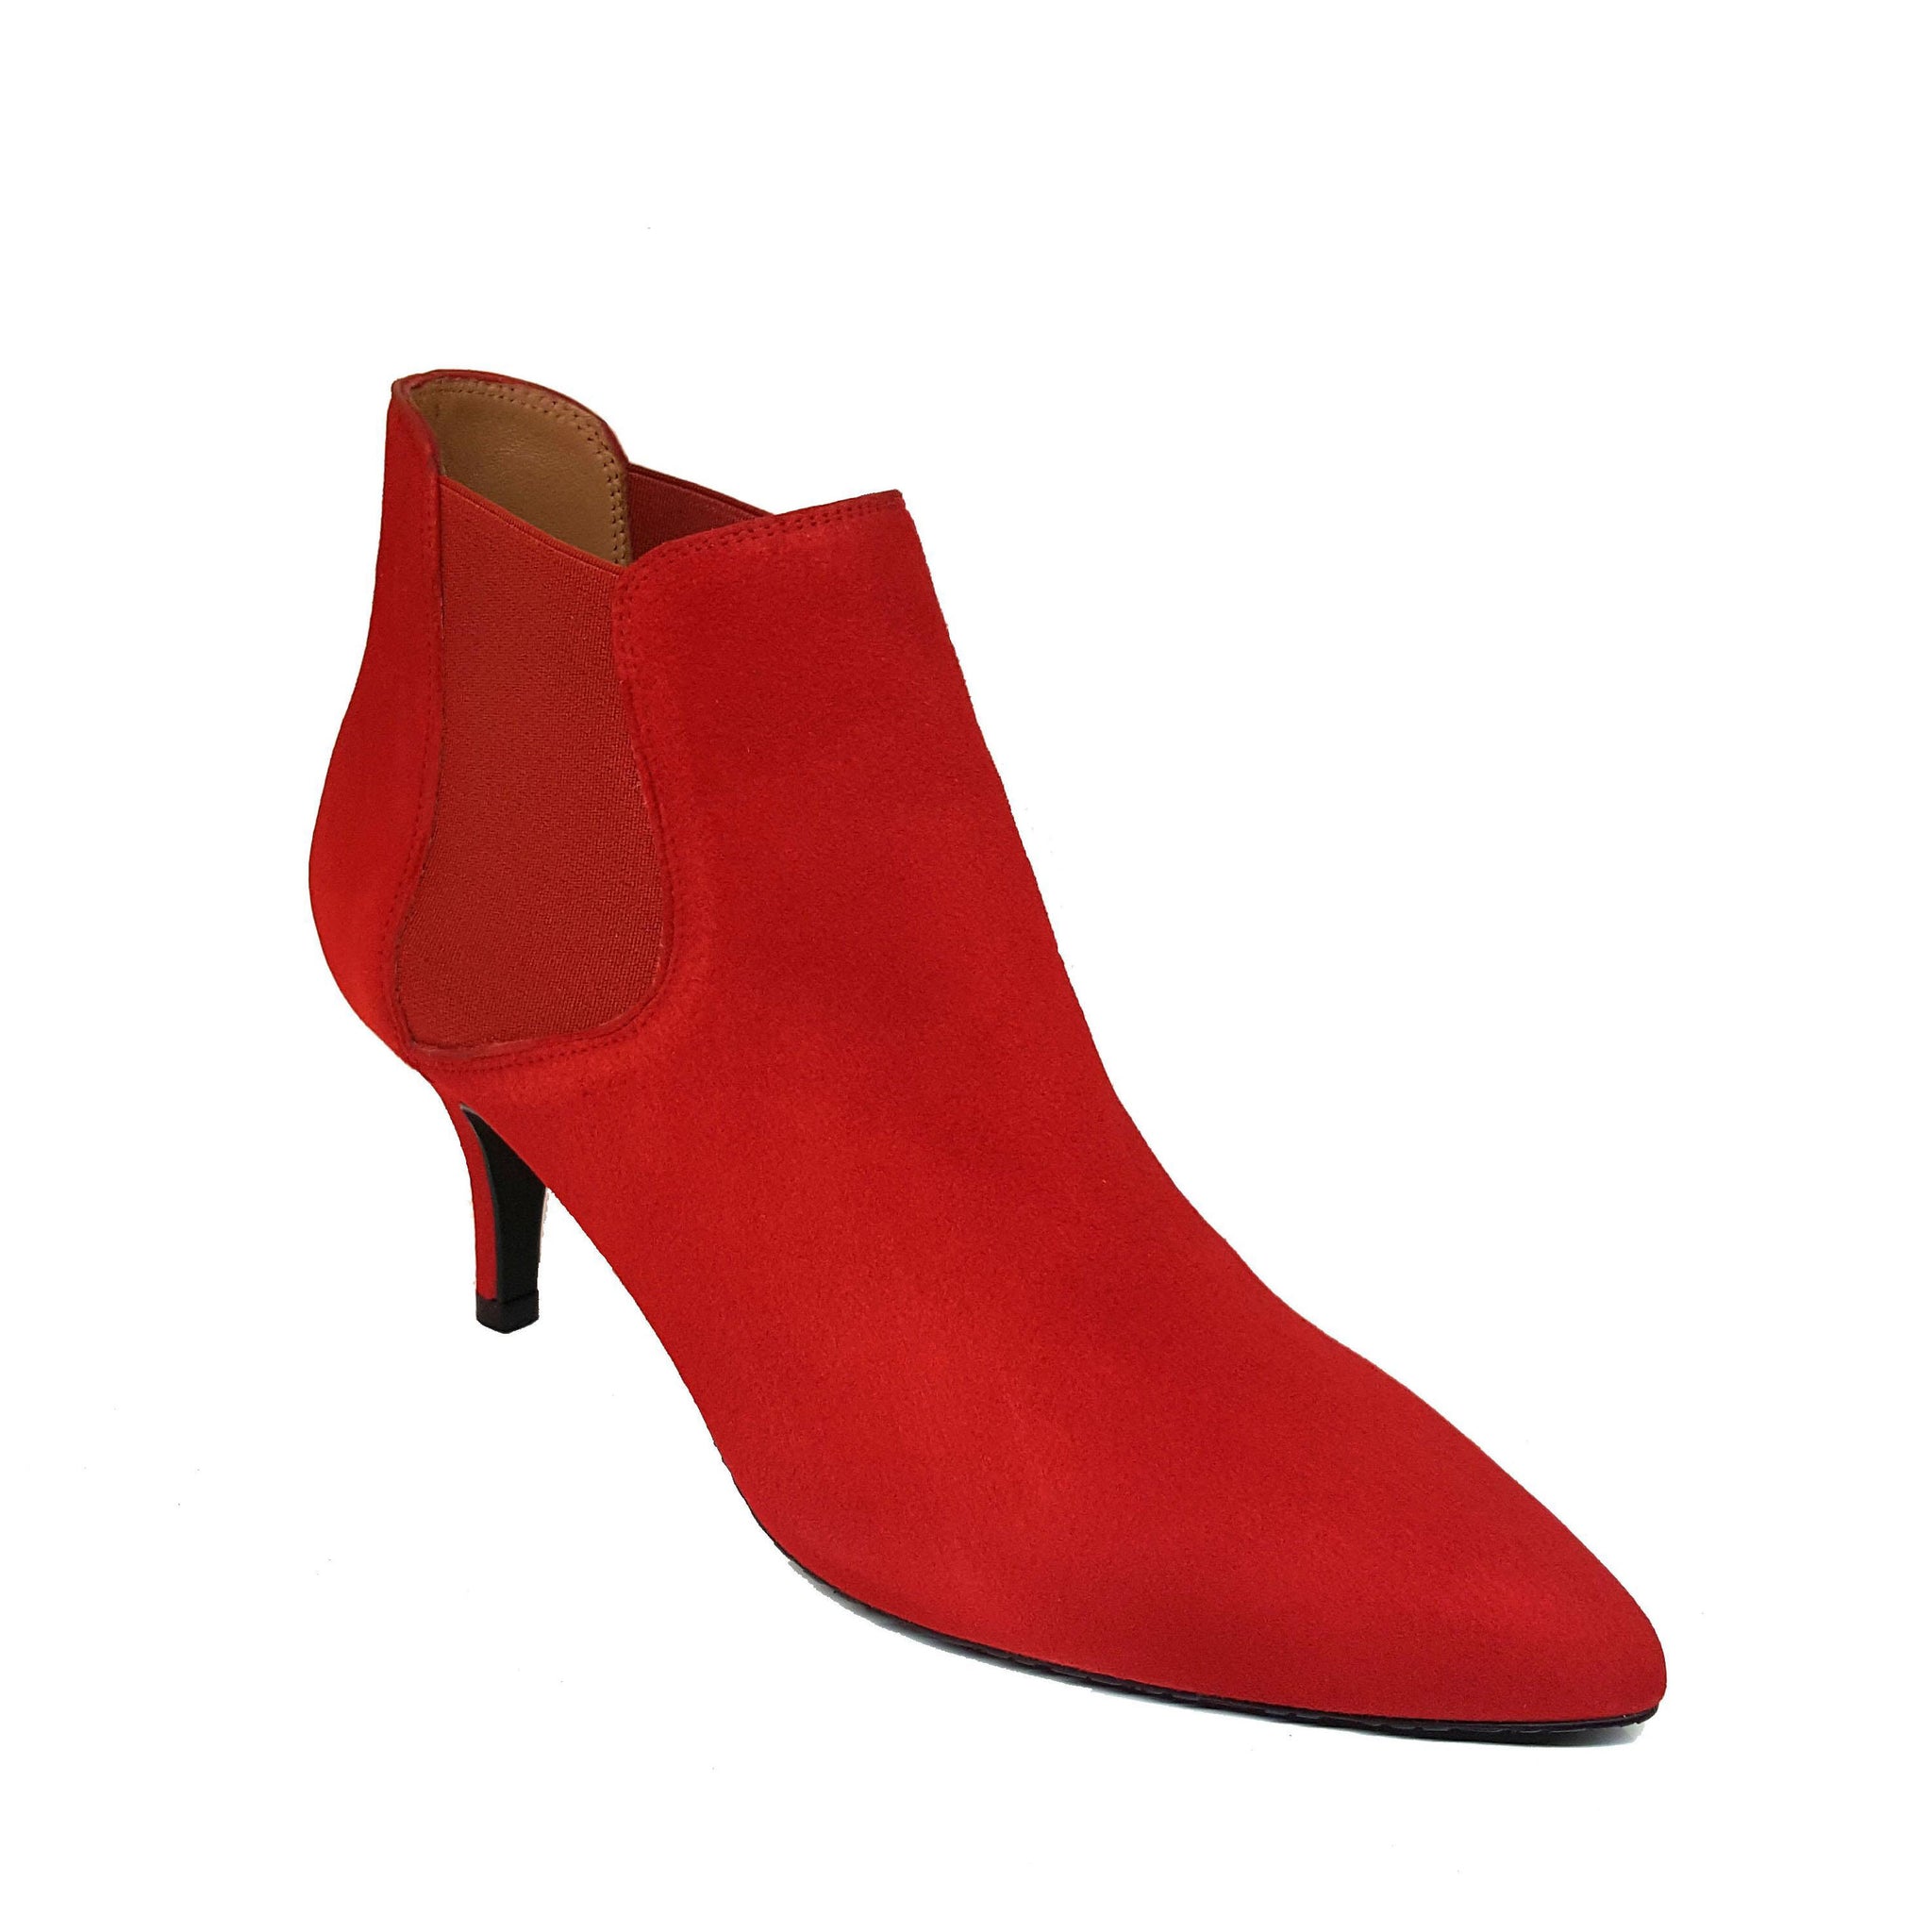 ILIRIO Red Leather Suede